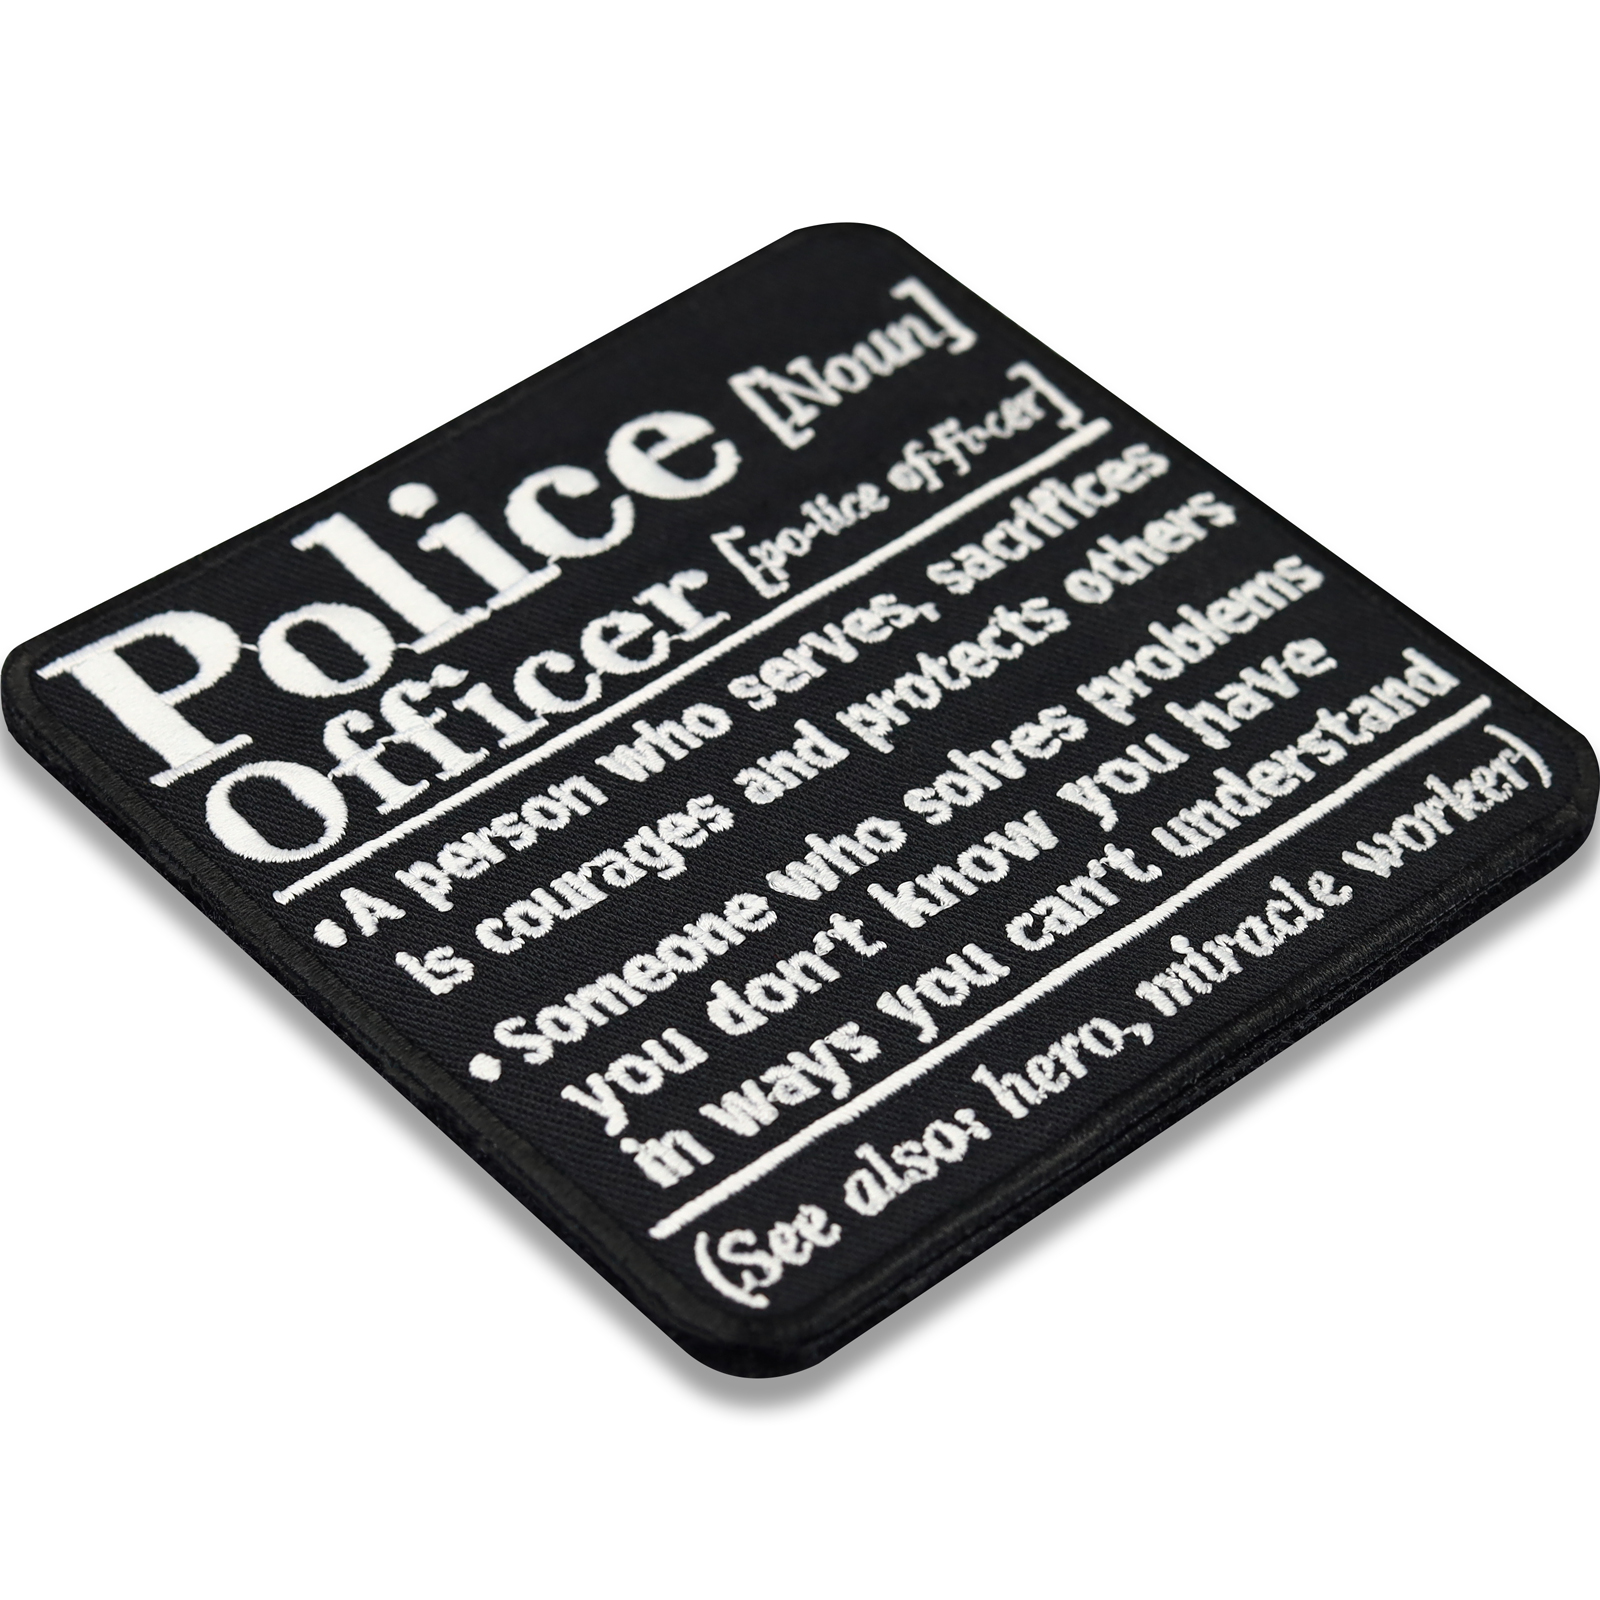 Police Officer - Patch